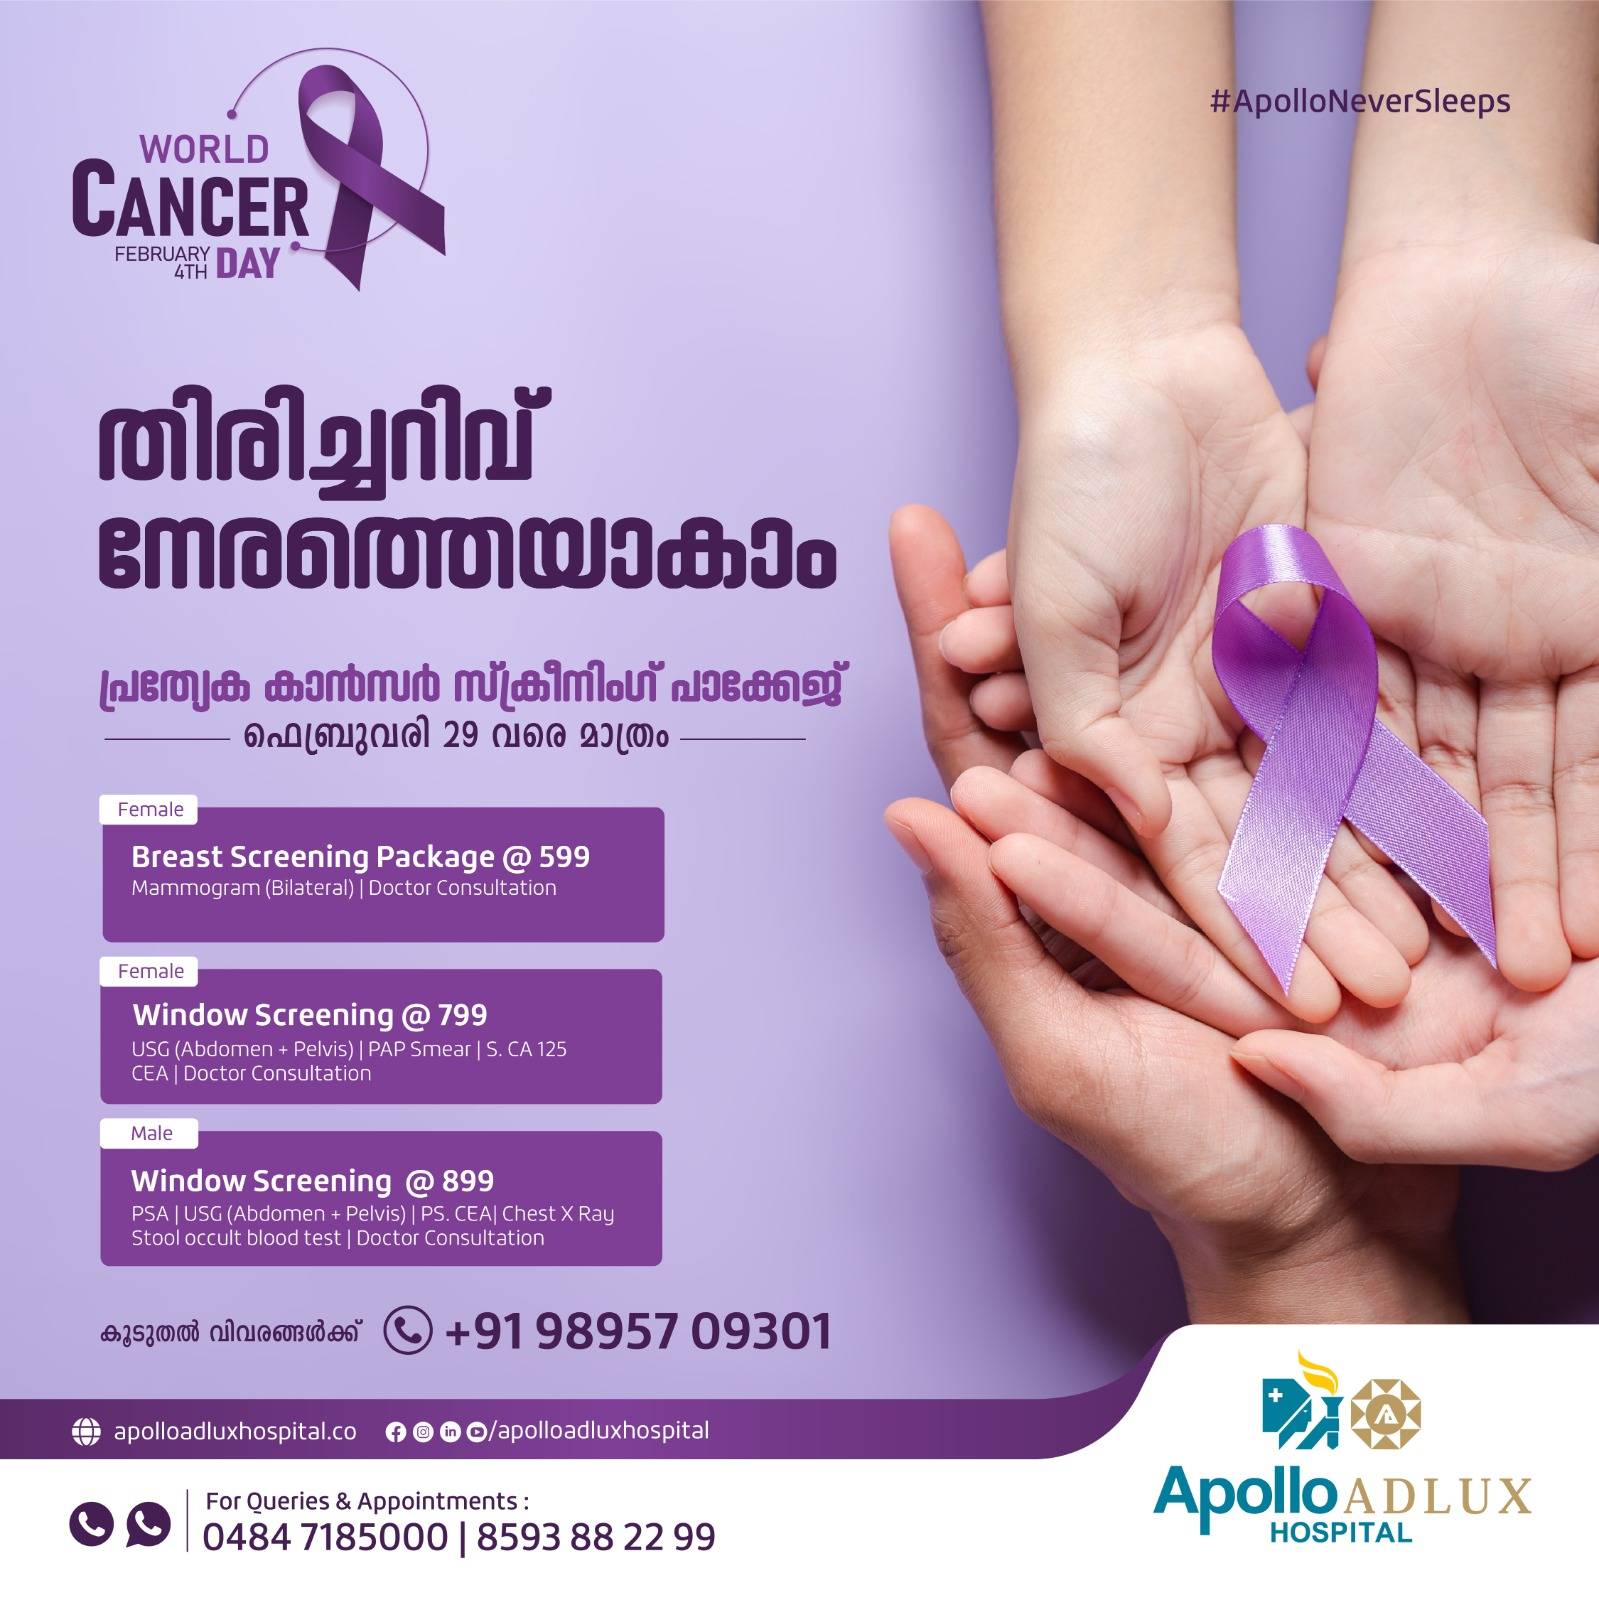 Apollo Adlux Hospital - Cancer Screening Package